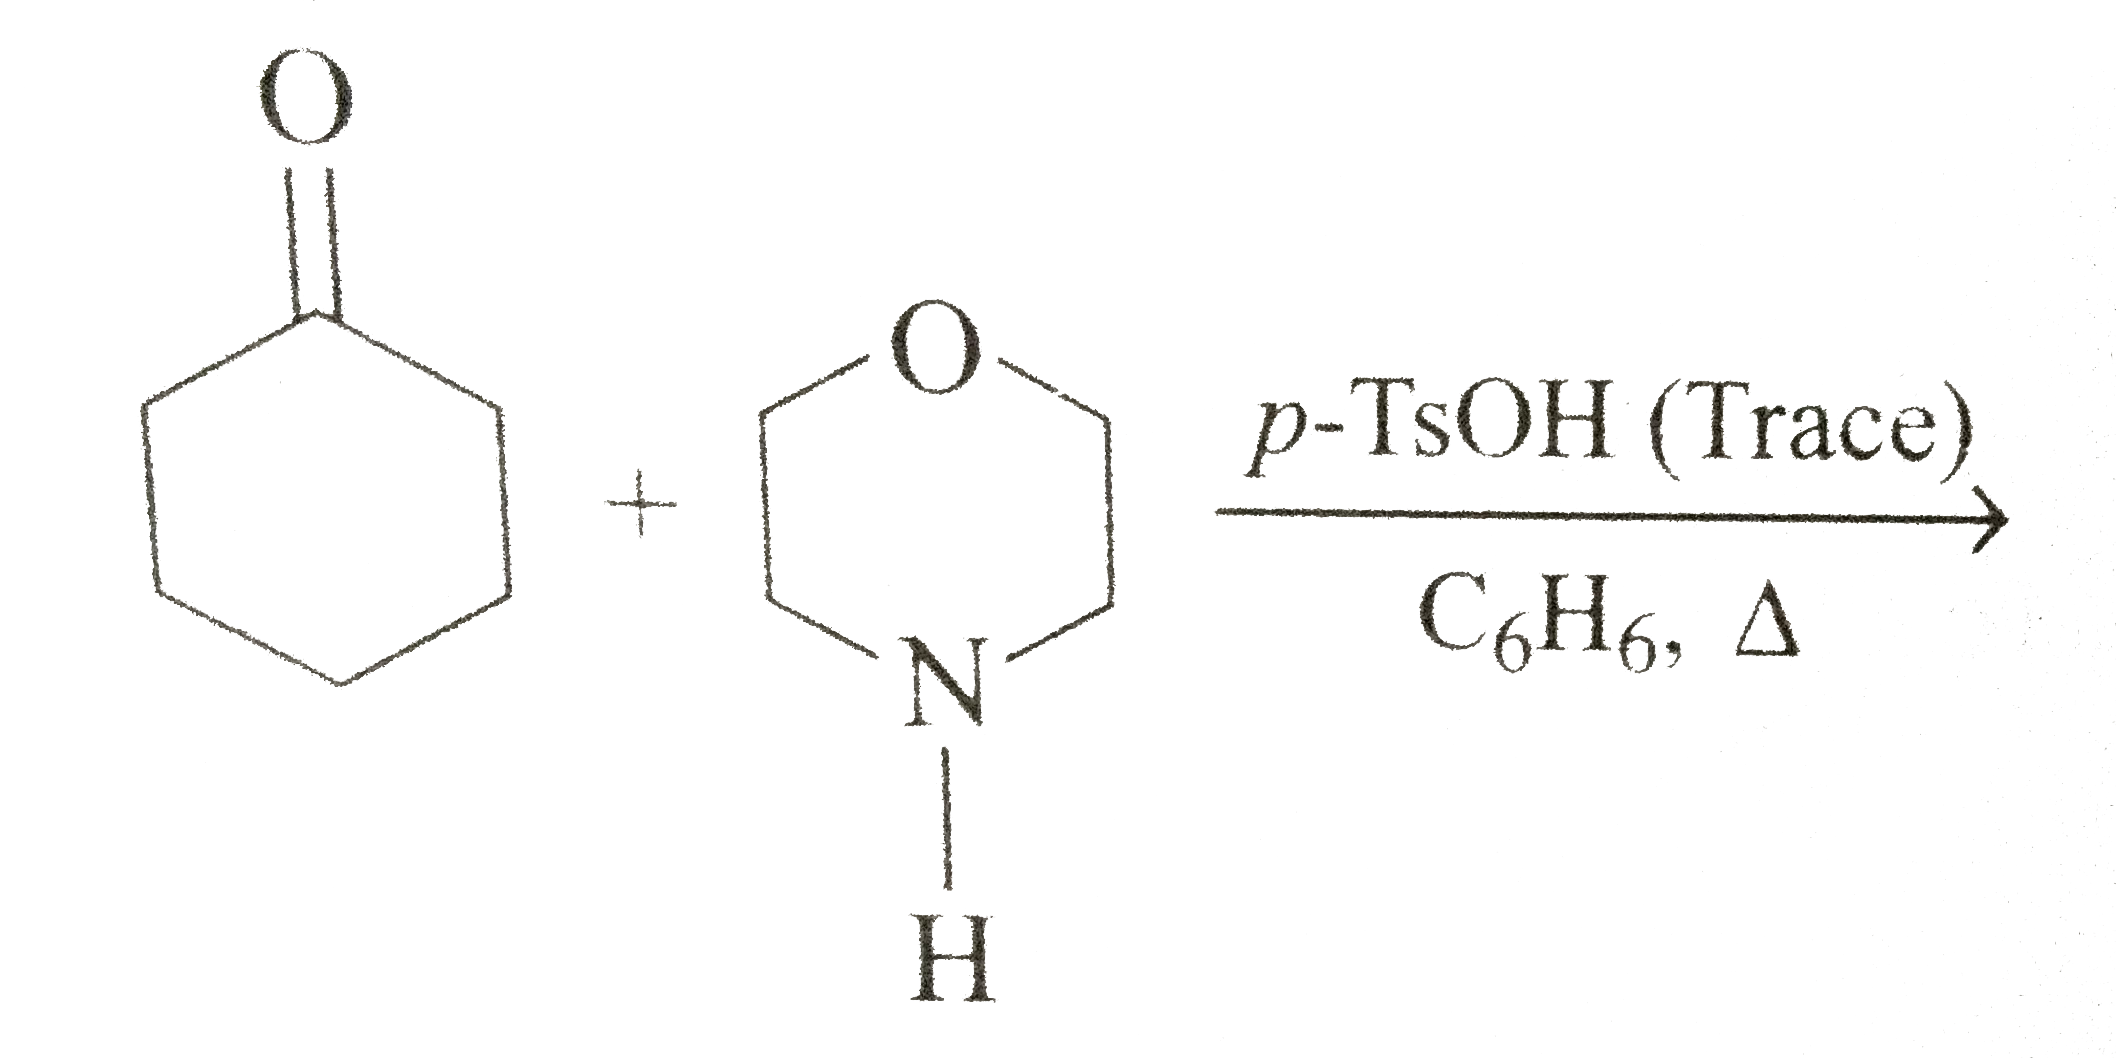 The major product formed in the reaction:    overset(p-TsOH(